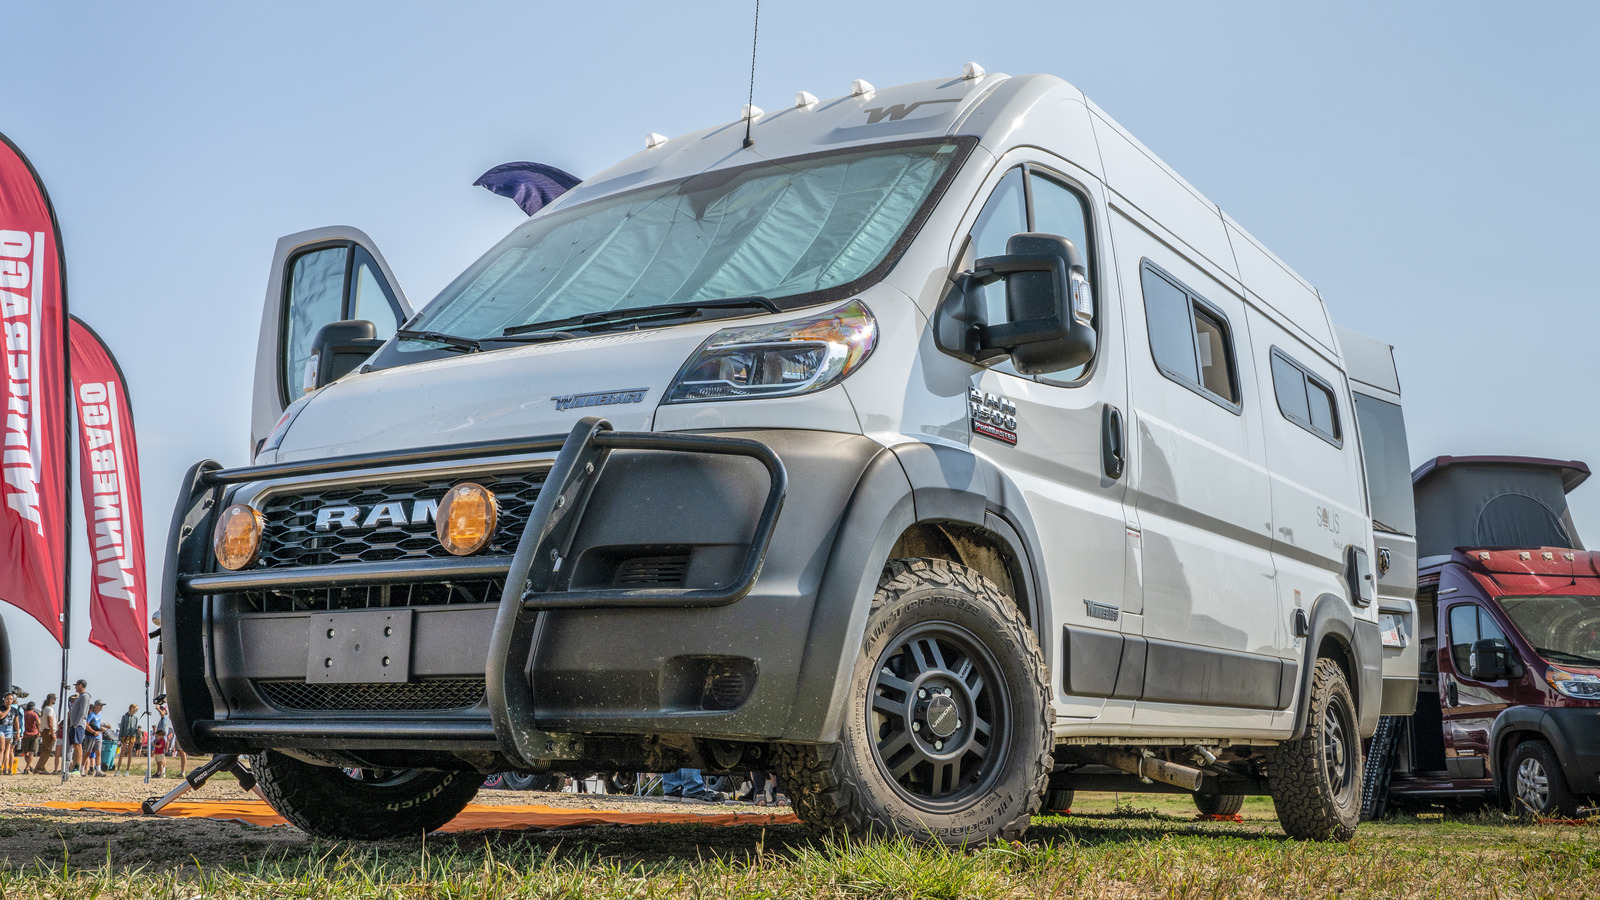 Fiat Ducato Van Goes on Sale in North America as the Ram Promaster